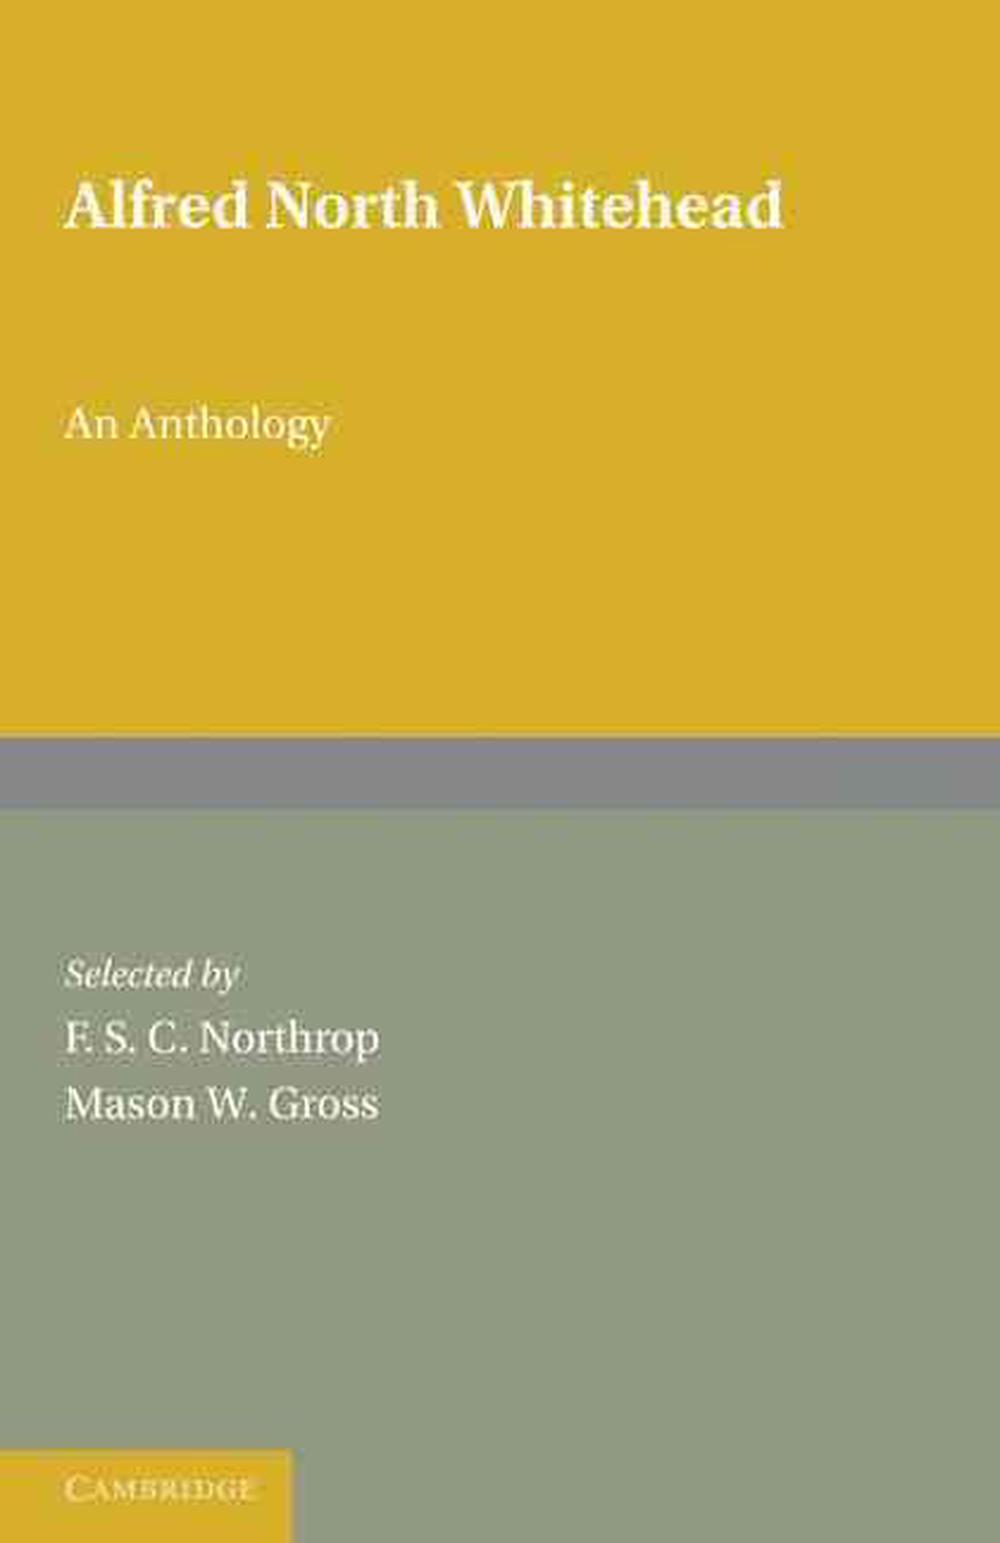 who reads alfred north whitehead